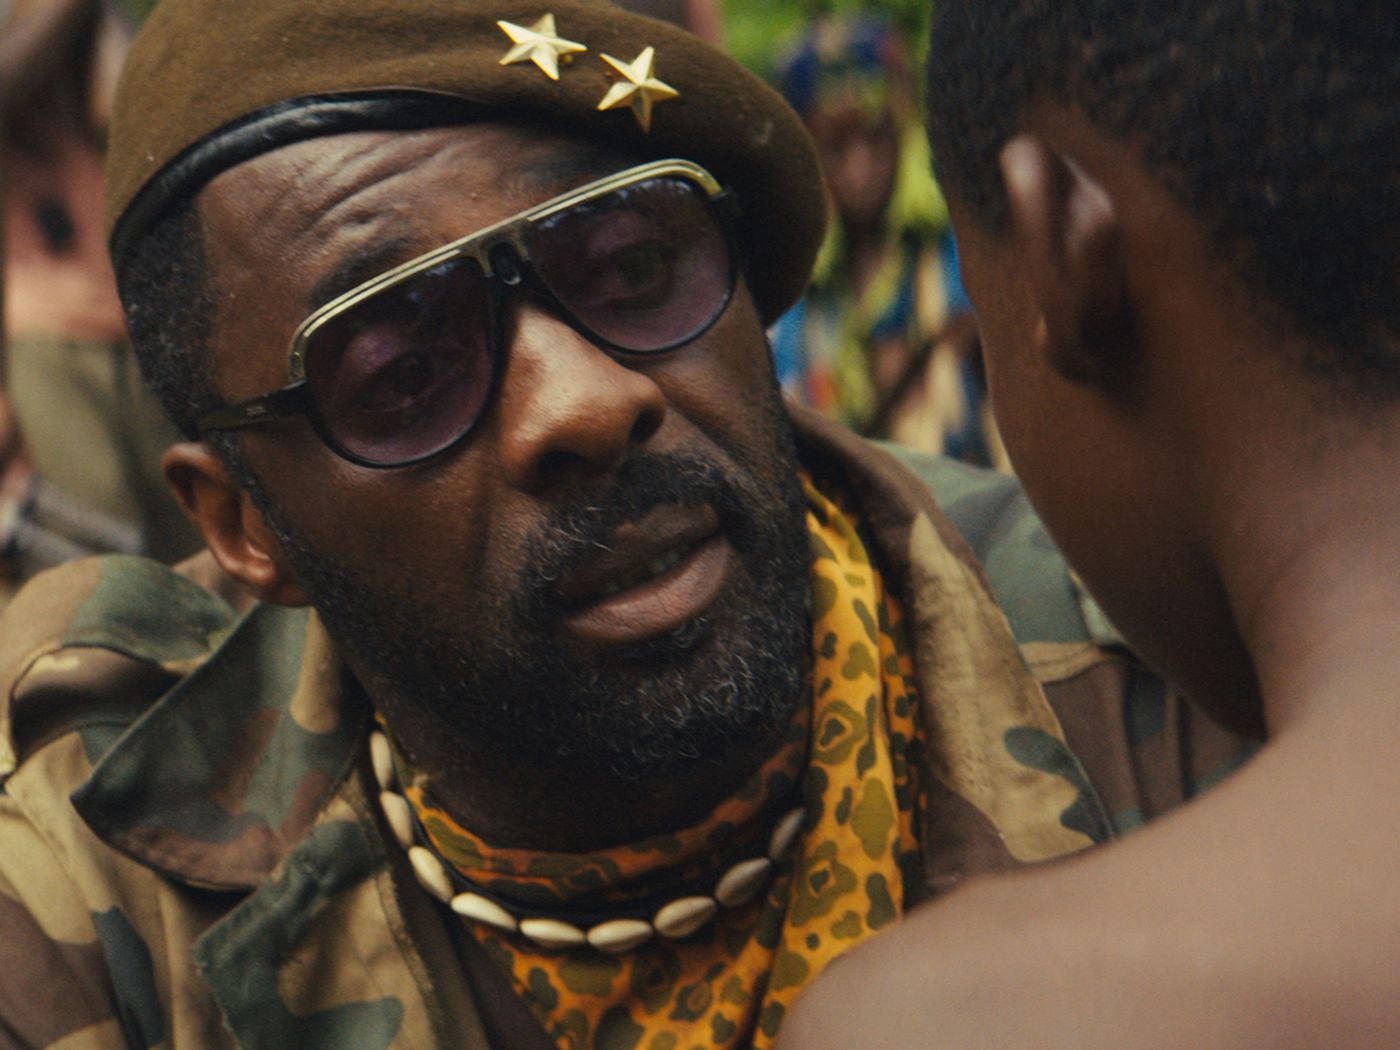 Beasts of No Nation has been viewed 3 million times on Netflix in the US